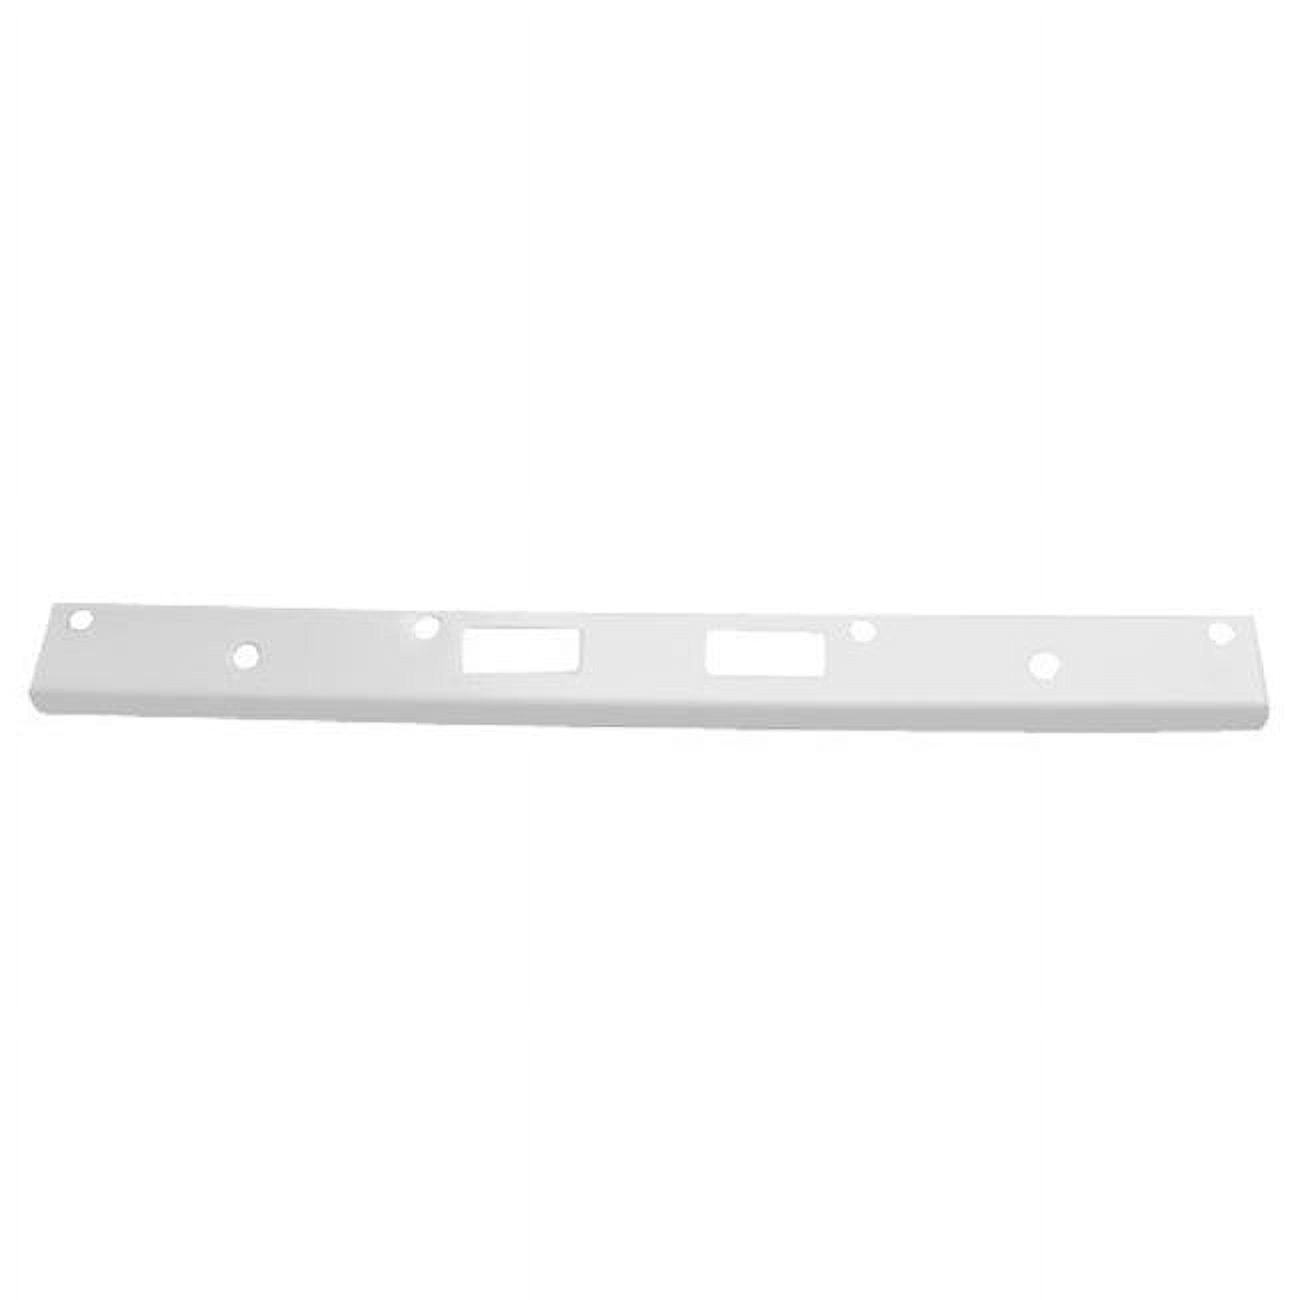 Fl 212n4-wh 12 In. Full Lip High Security Strike With 4 In. Ctc Latch Holes, White Coated